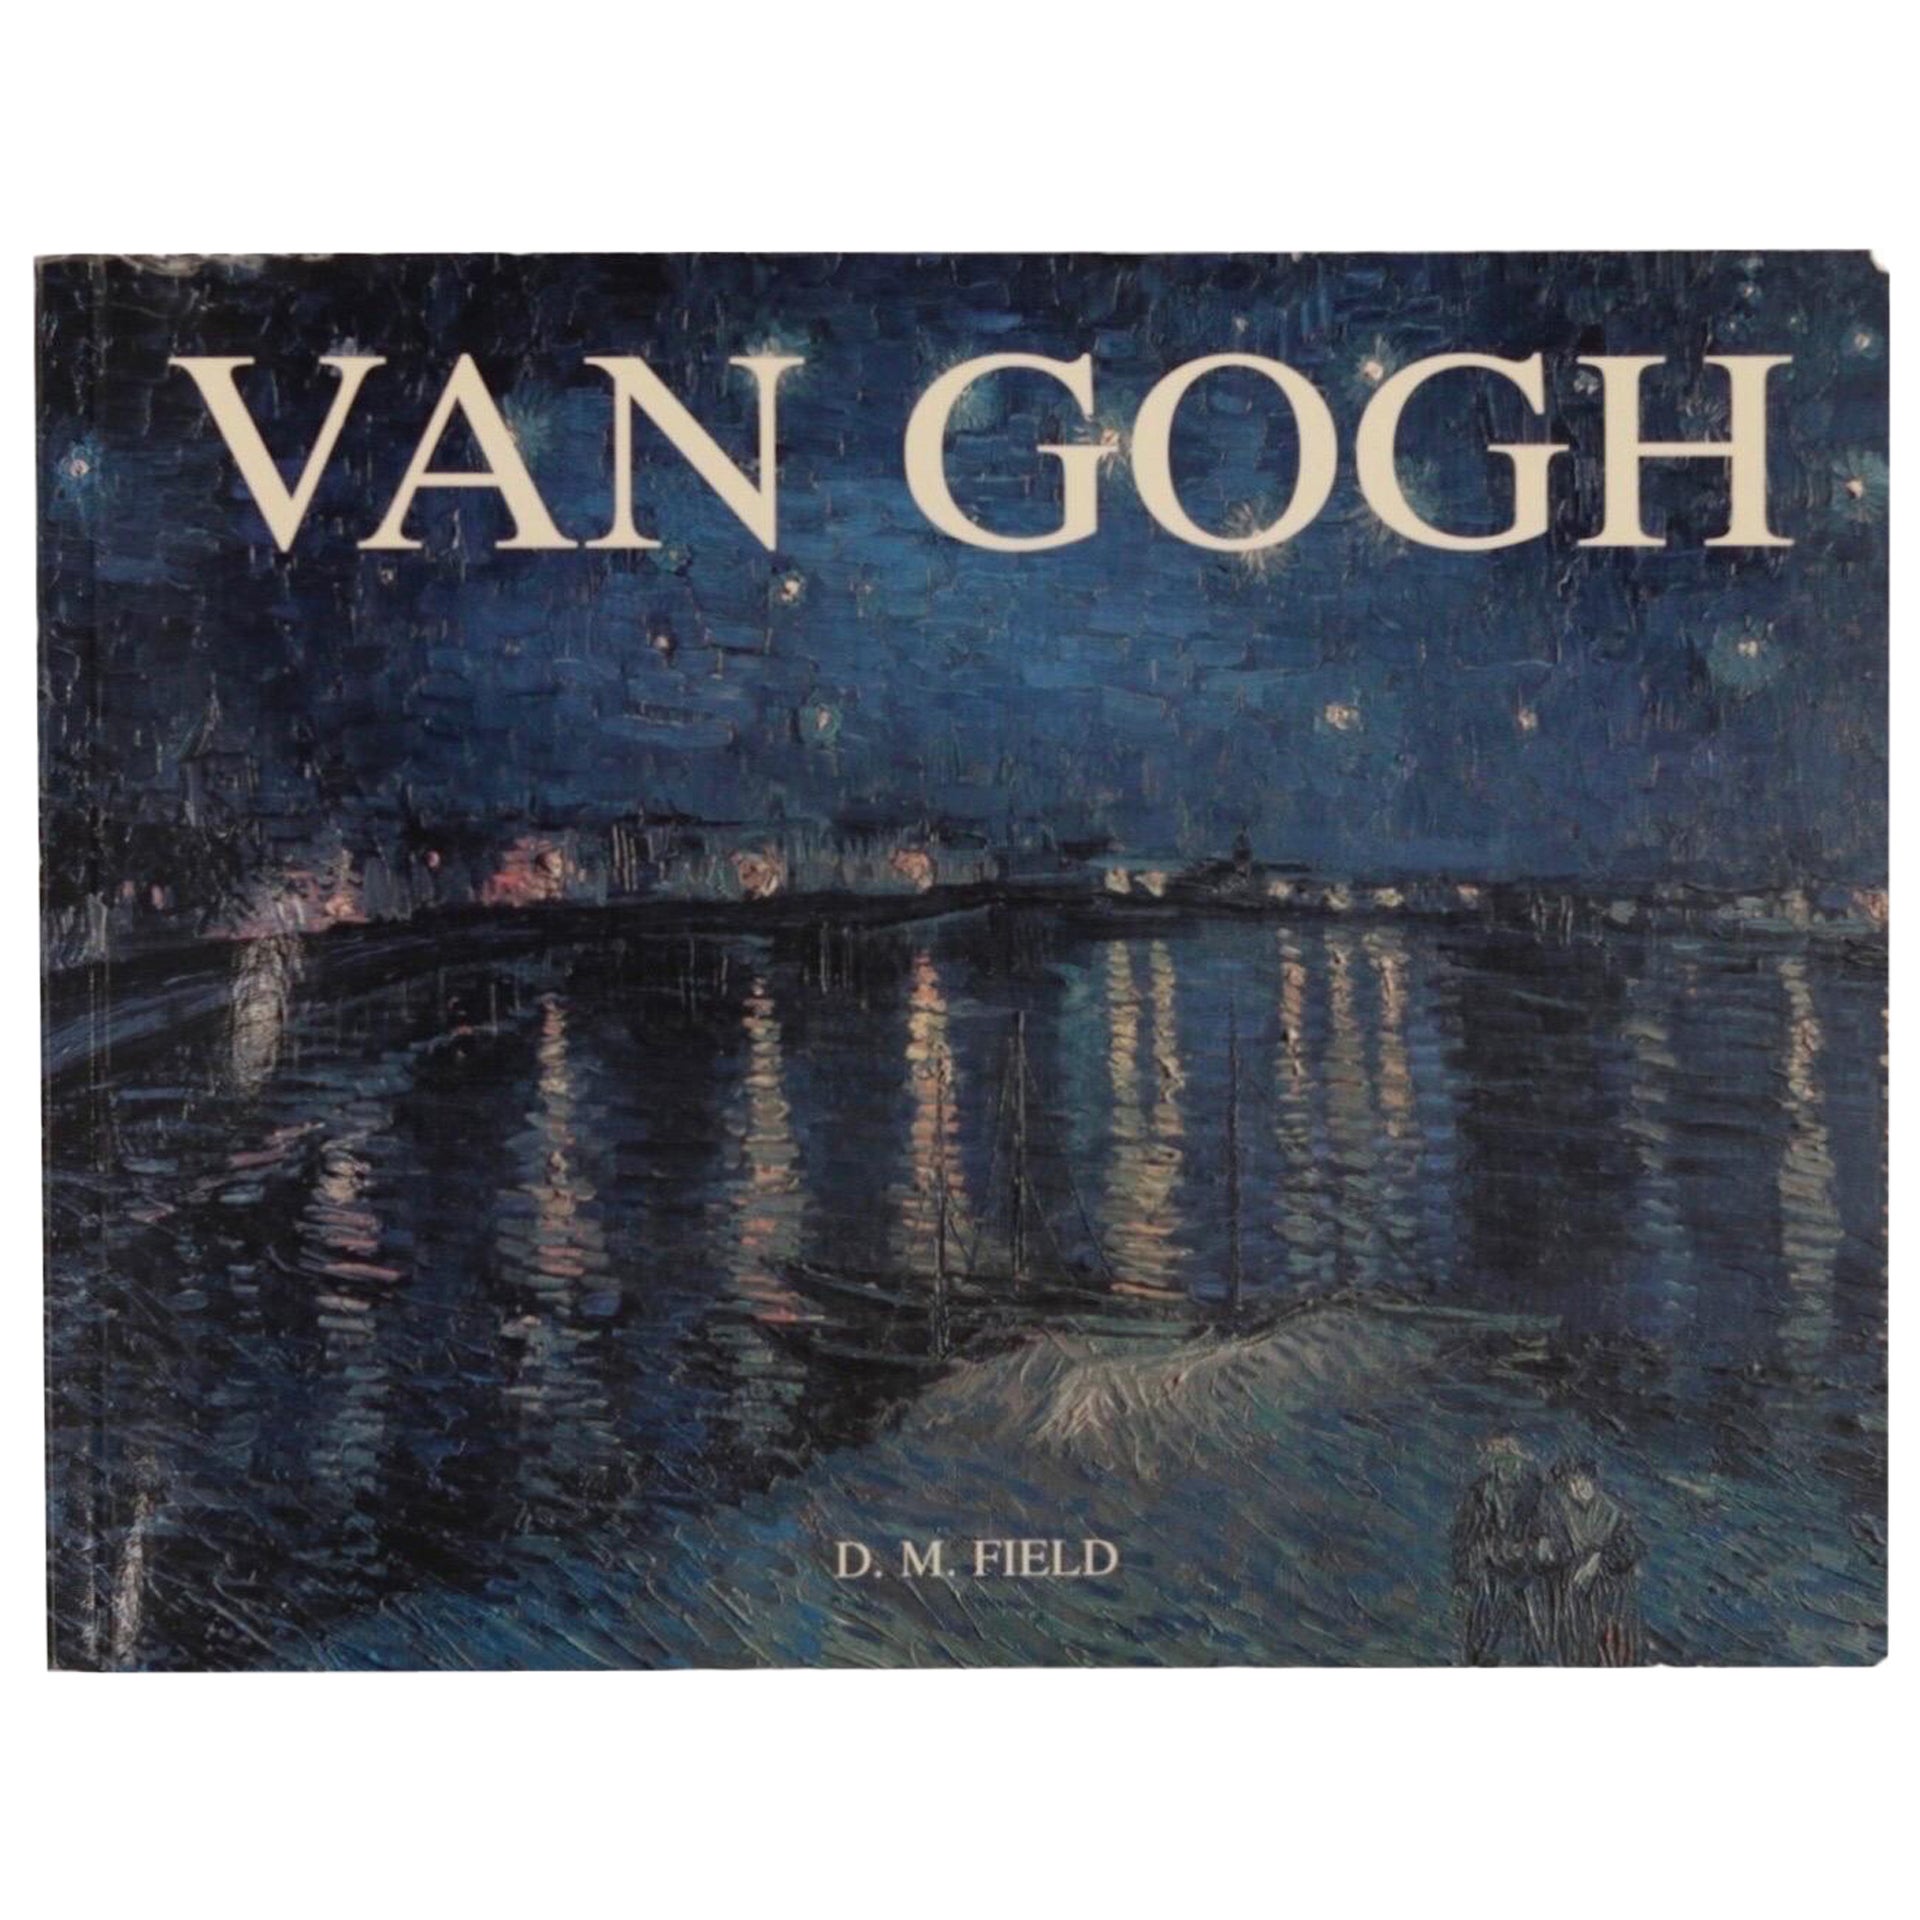 Van Gogh by D. M. Field For Sale